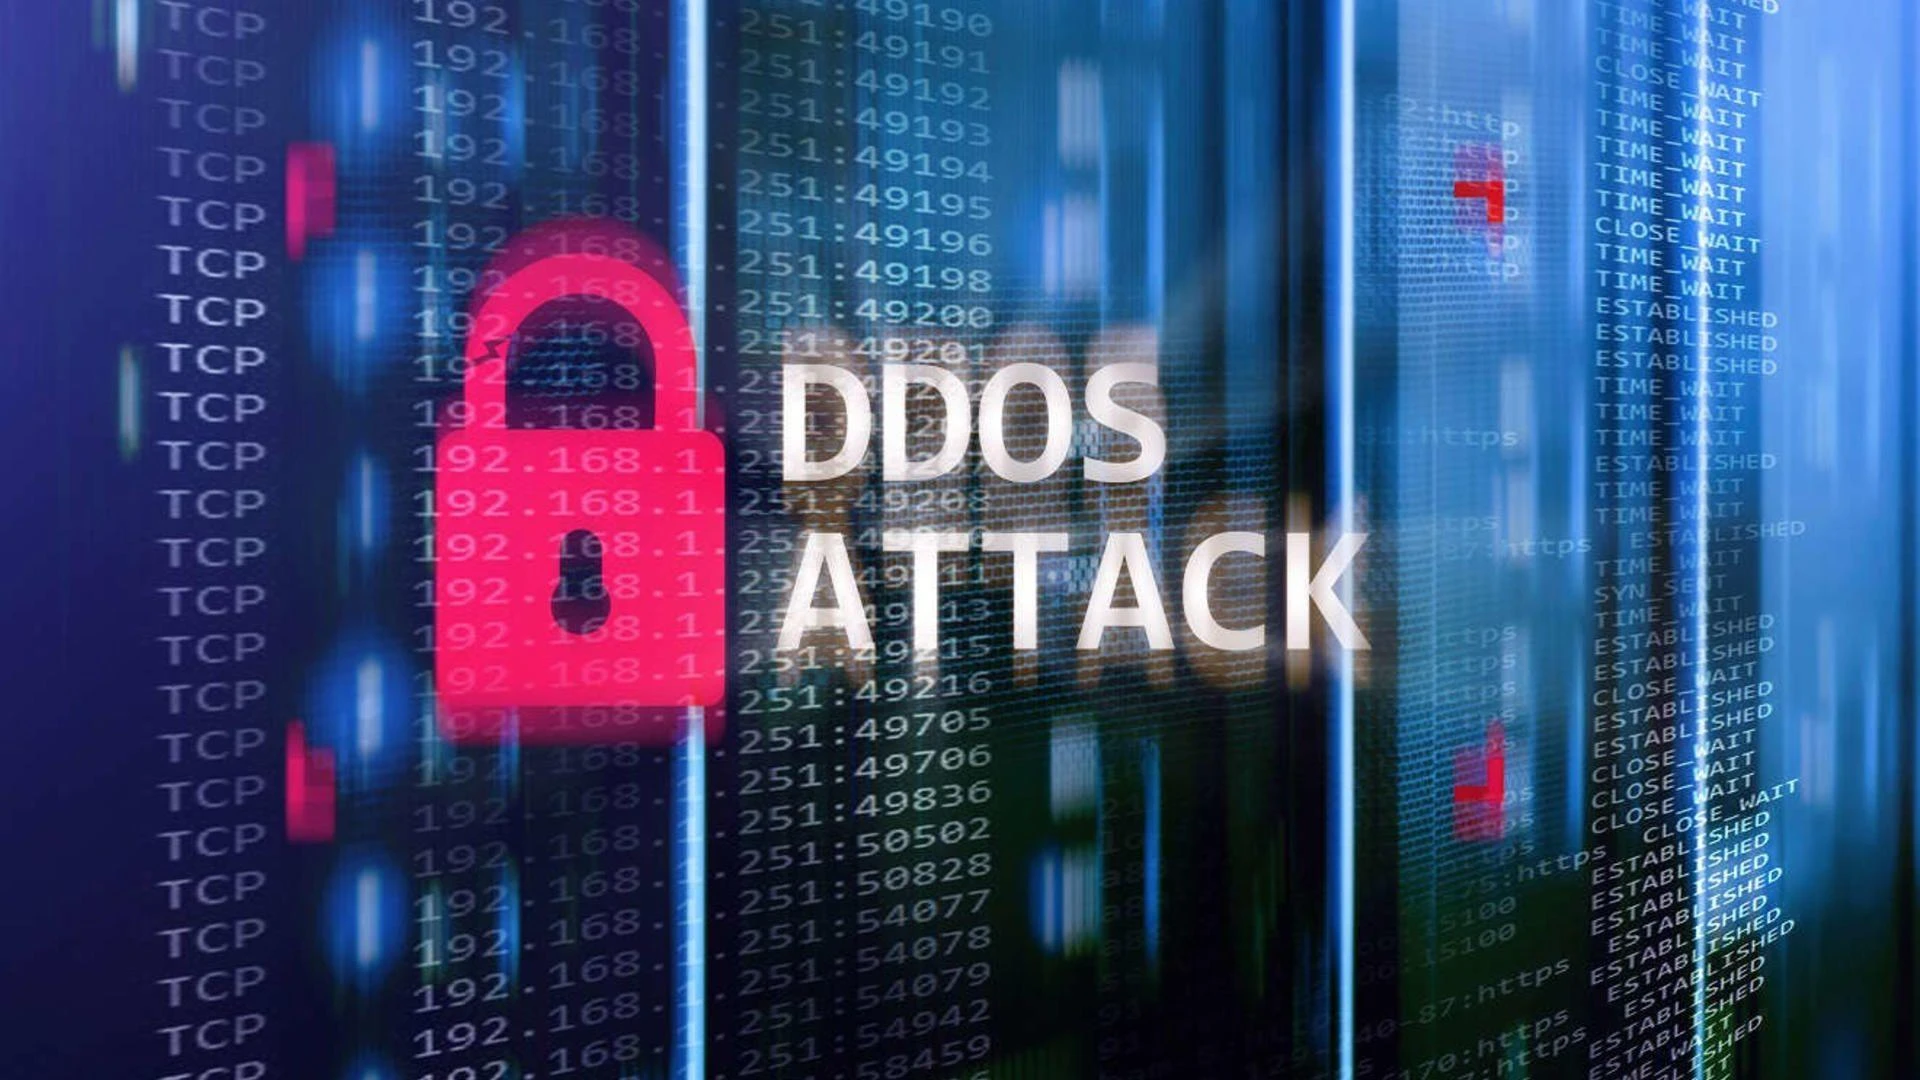 Anti-ddos for VPS, secure your web server